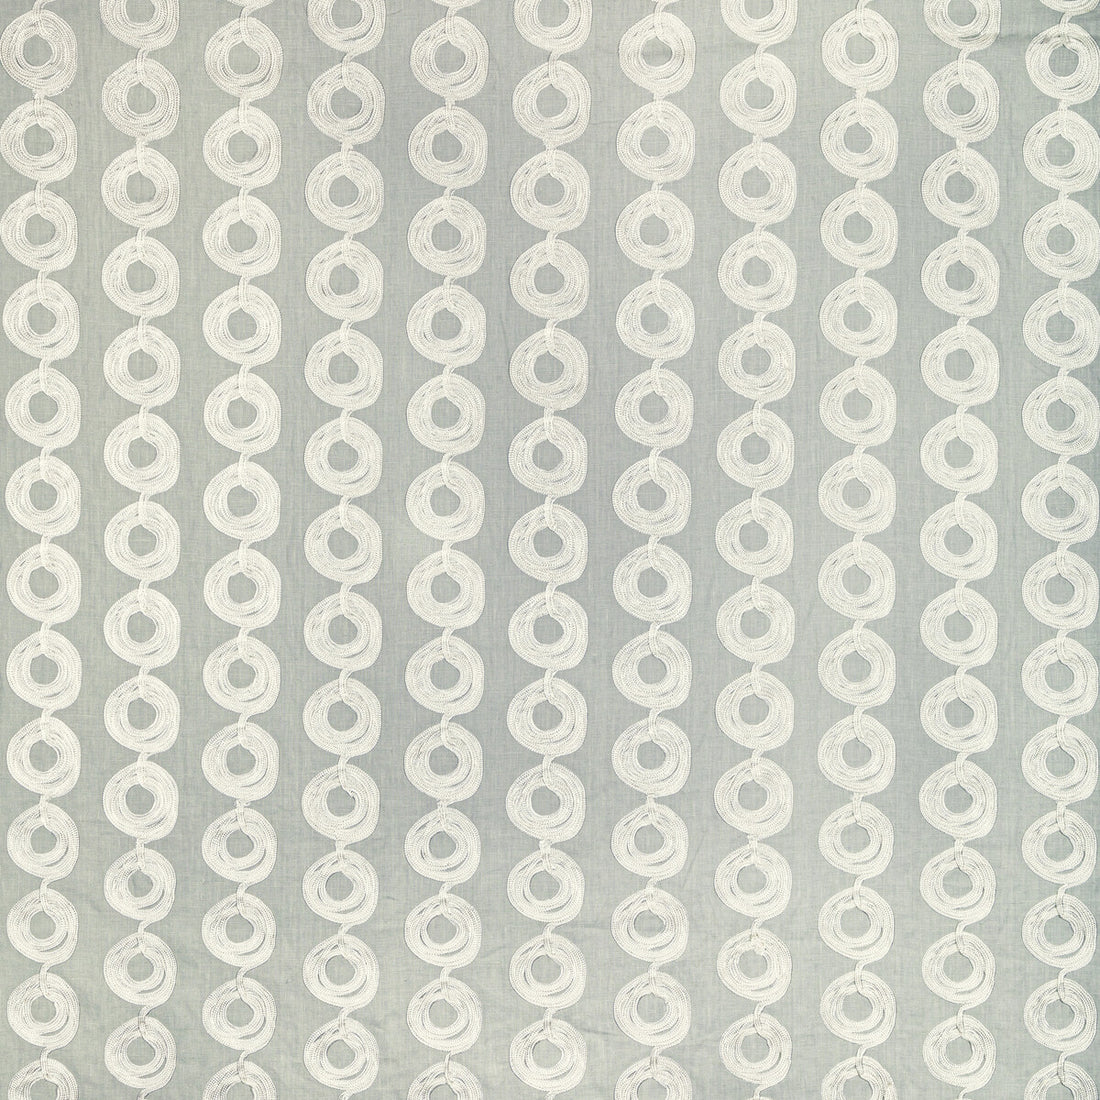 Coincide fabric in mist color - pattern 36338.1101.0 - by Kravet Couture in the Modern Luxe III collection